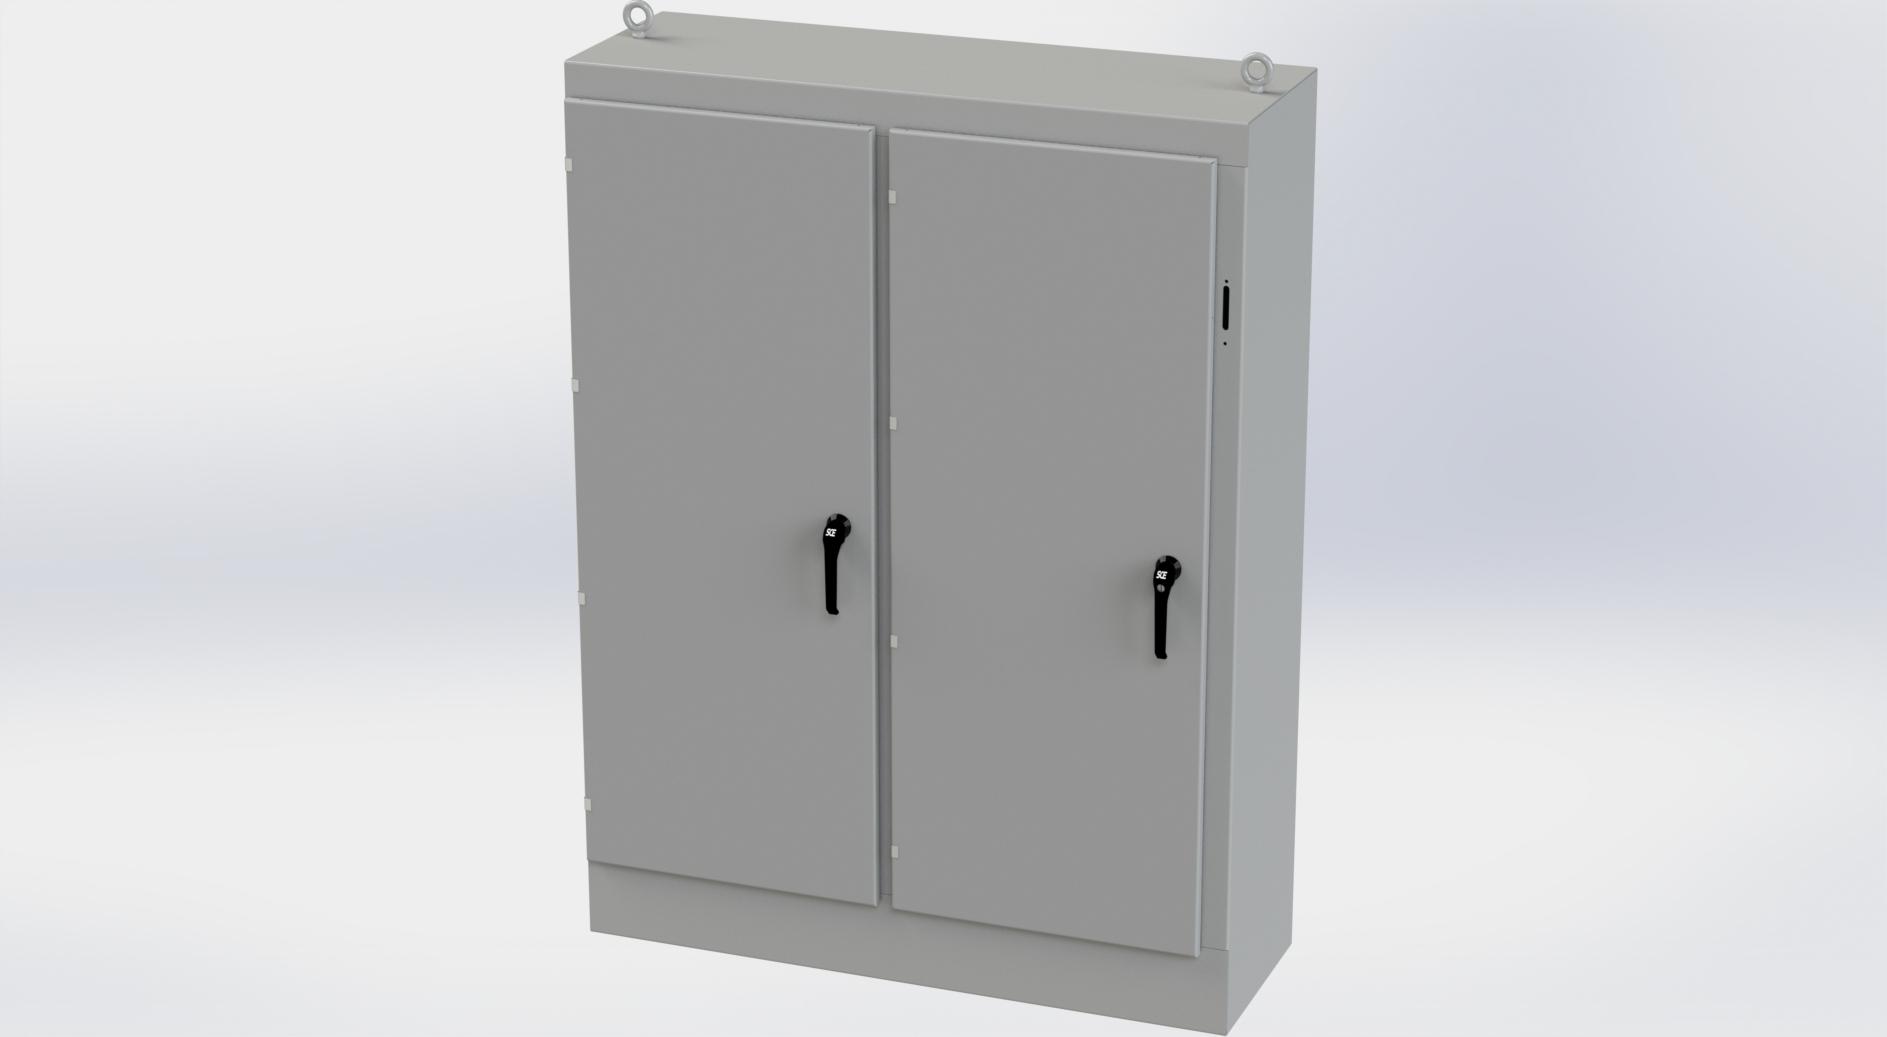 Saginaw Control SCE-72XM5418 2DR XM Enclosure, Height:72.00", Width:53.75", Depth:18.00", ANSI-61 gray powder coating inside and out. Sub-panels are powder coated white.